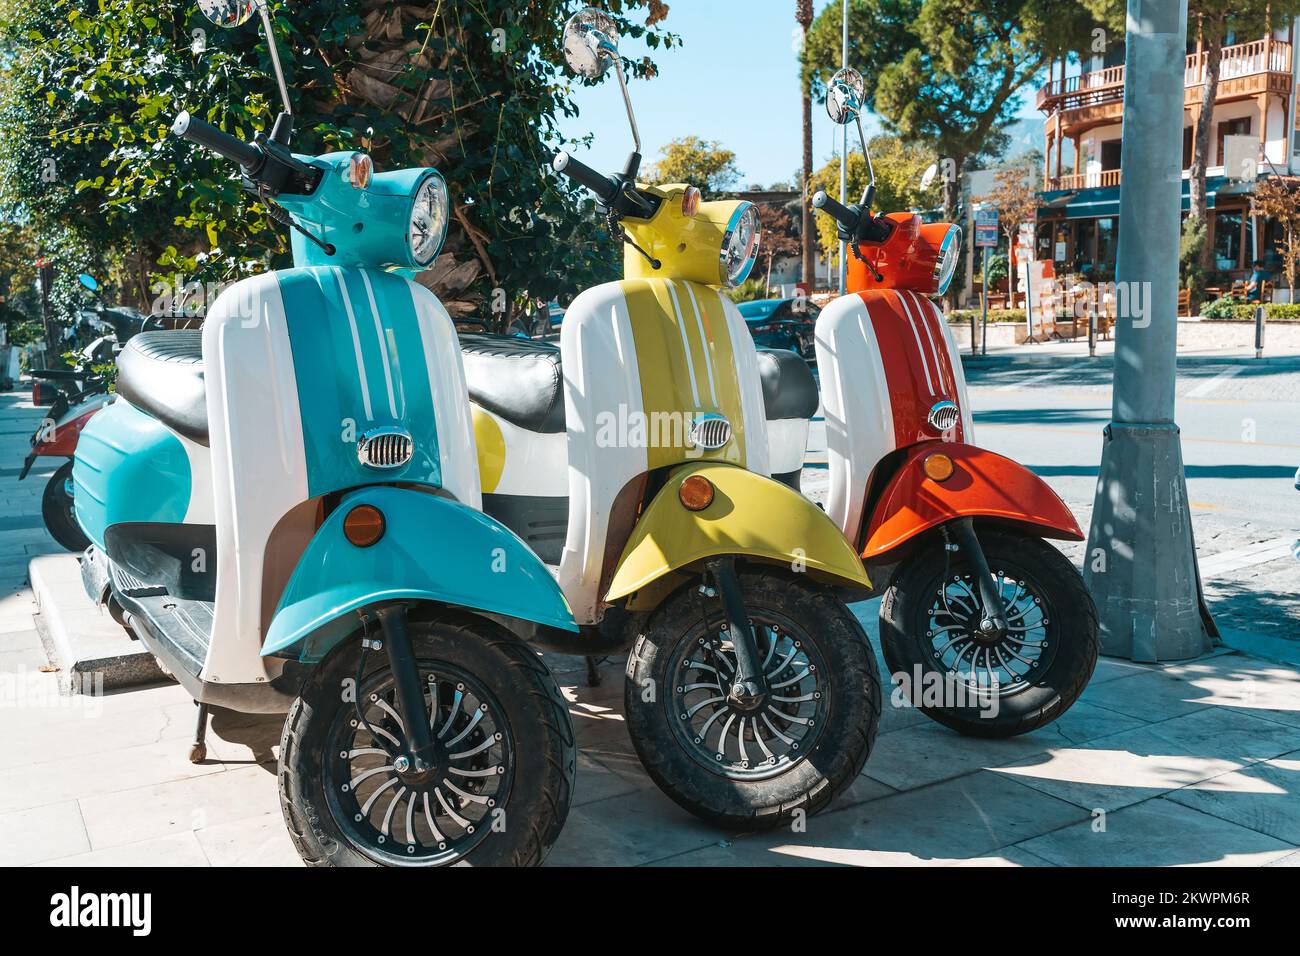 Scooter motorcycle on city street. Vintage classic retro scooters various bright colors on a sunny tourist street. Lifestyle, retro concept. High quality photo Stock Photo